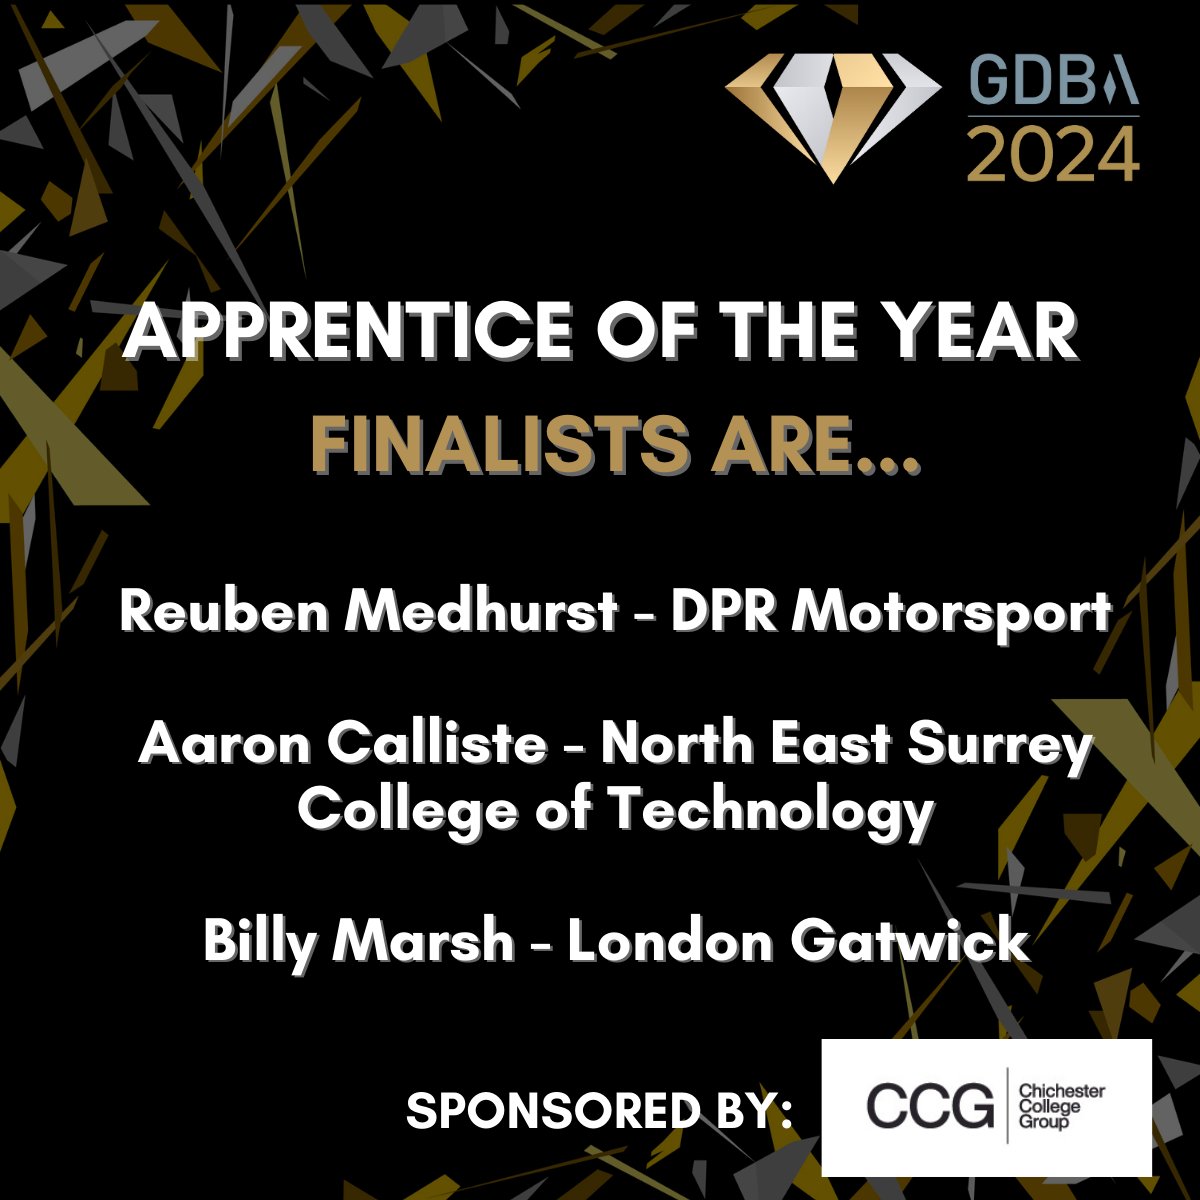 The winner of 'Apprentice of the Year', sponsored by Chichester College Group, will have shown a significant contribution towards their workplace alongside outstanding personal and professional development. 🏆View the full shortlist here: gatwickdiamondbusinessawards.com/event/gdba-202… #GDBA2024